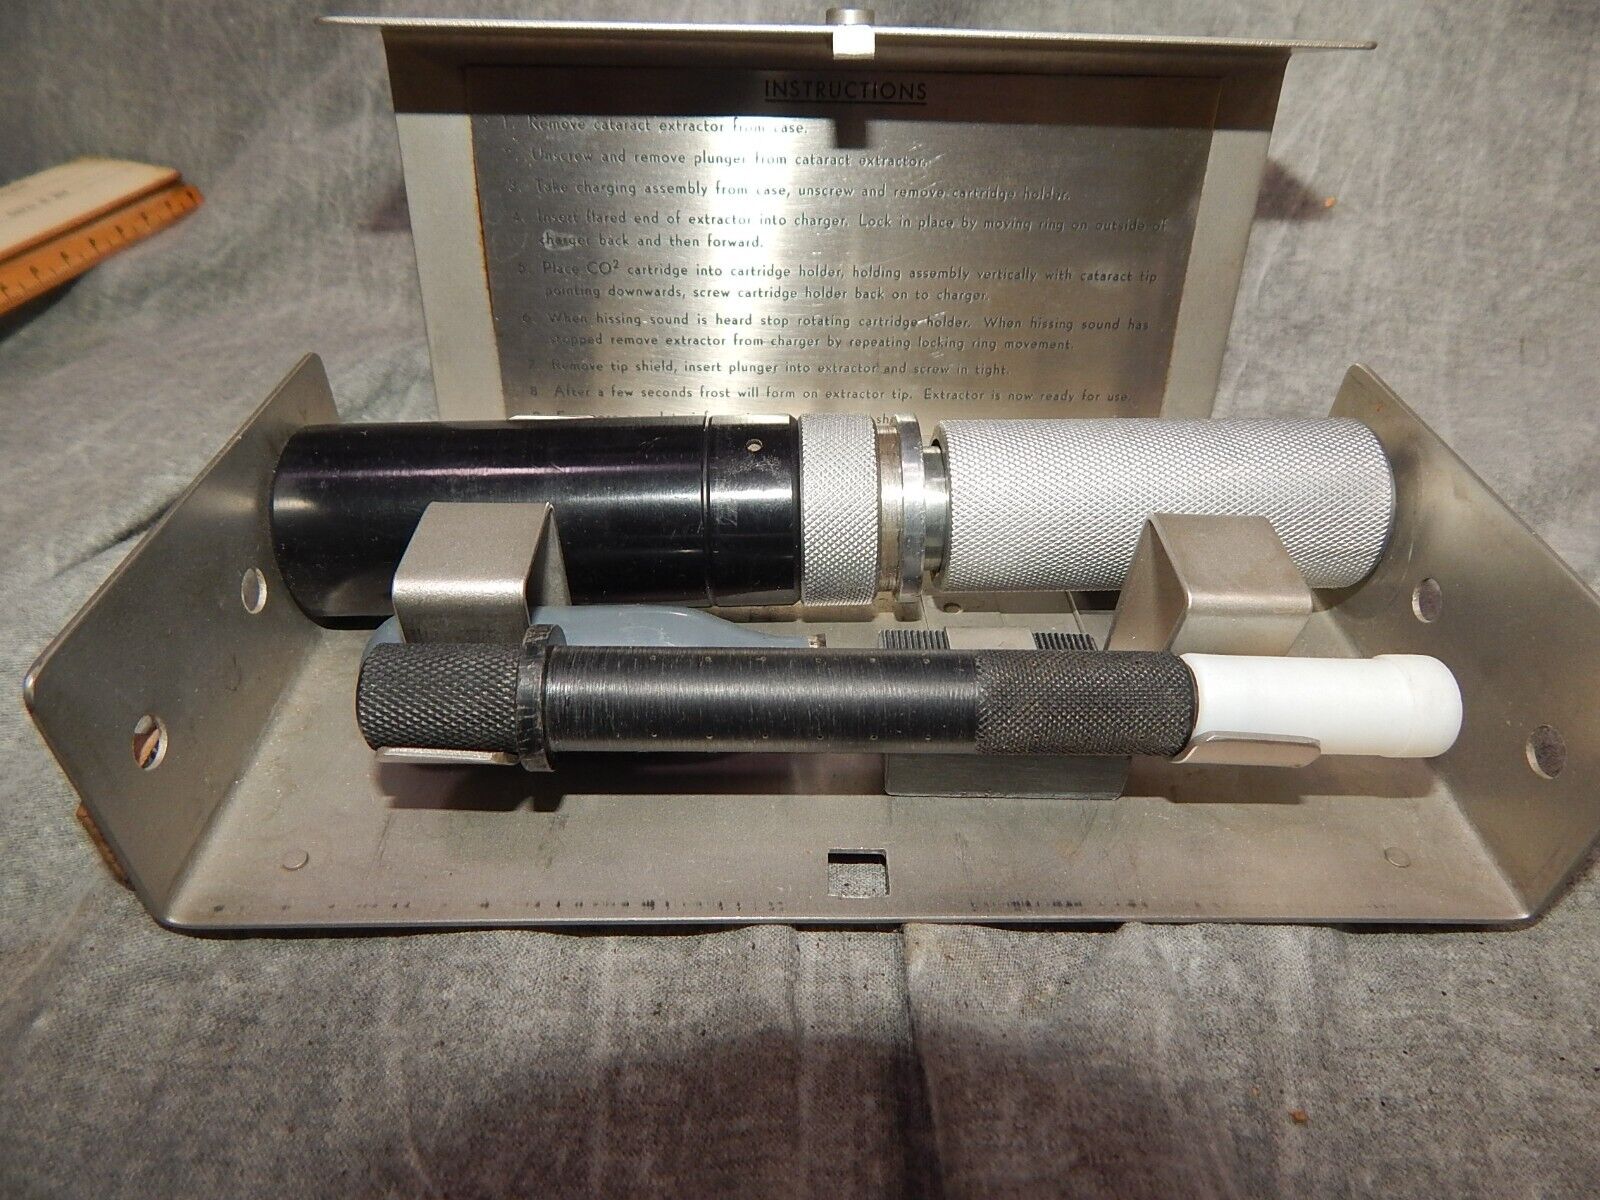 c 1960's Bellows Cryoextractor (Cataract Surgery) by Mueller